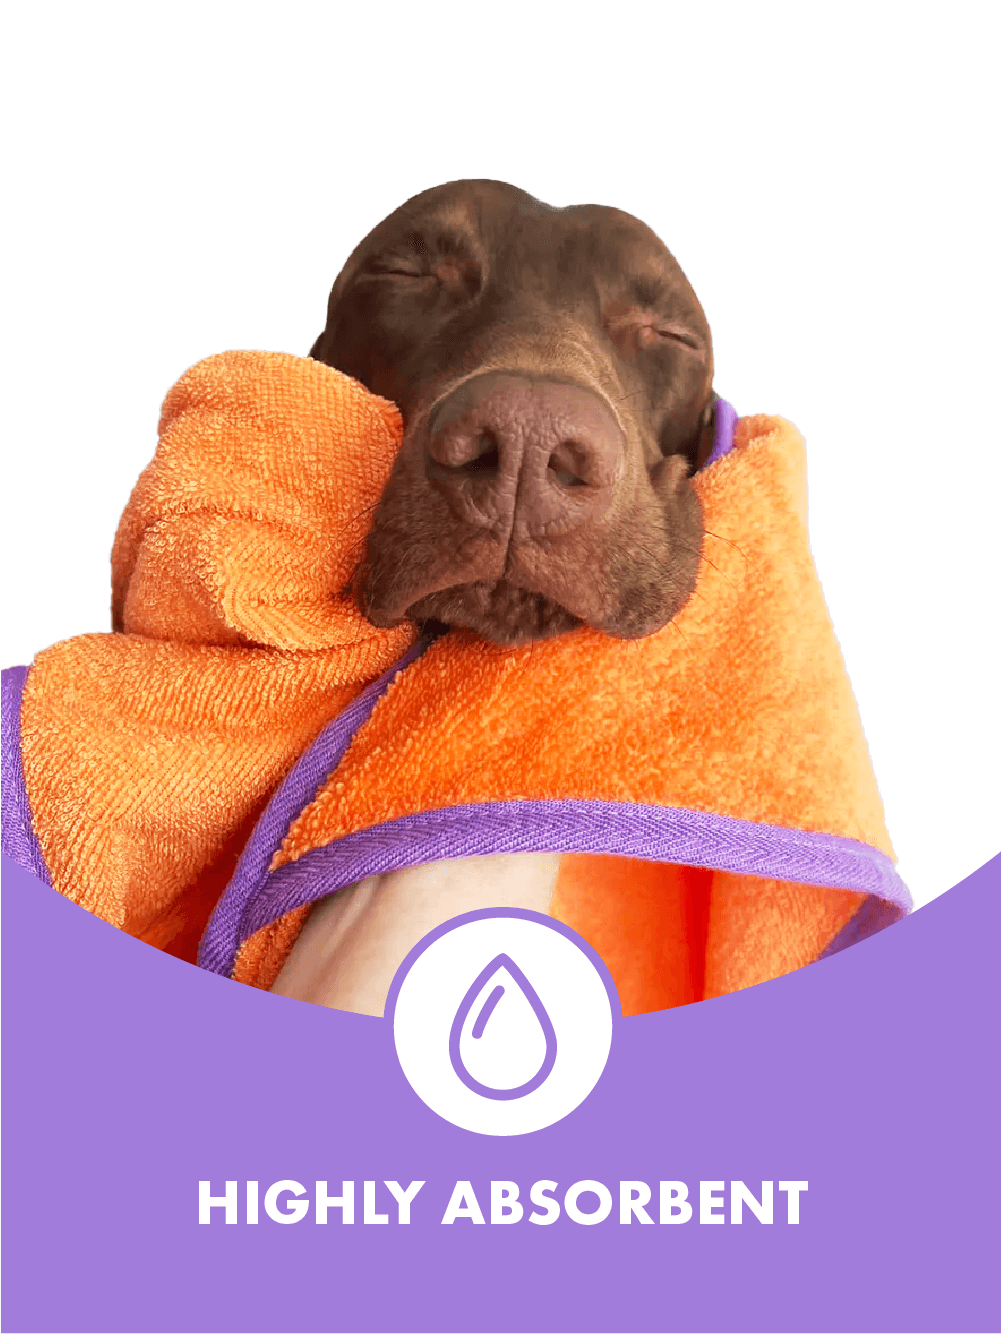 Bamboo dog bath towel, highly absorbent, quick drying, best dog bath towel